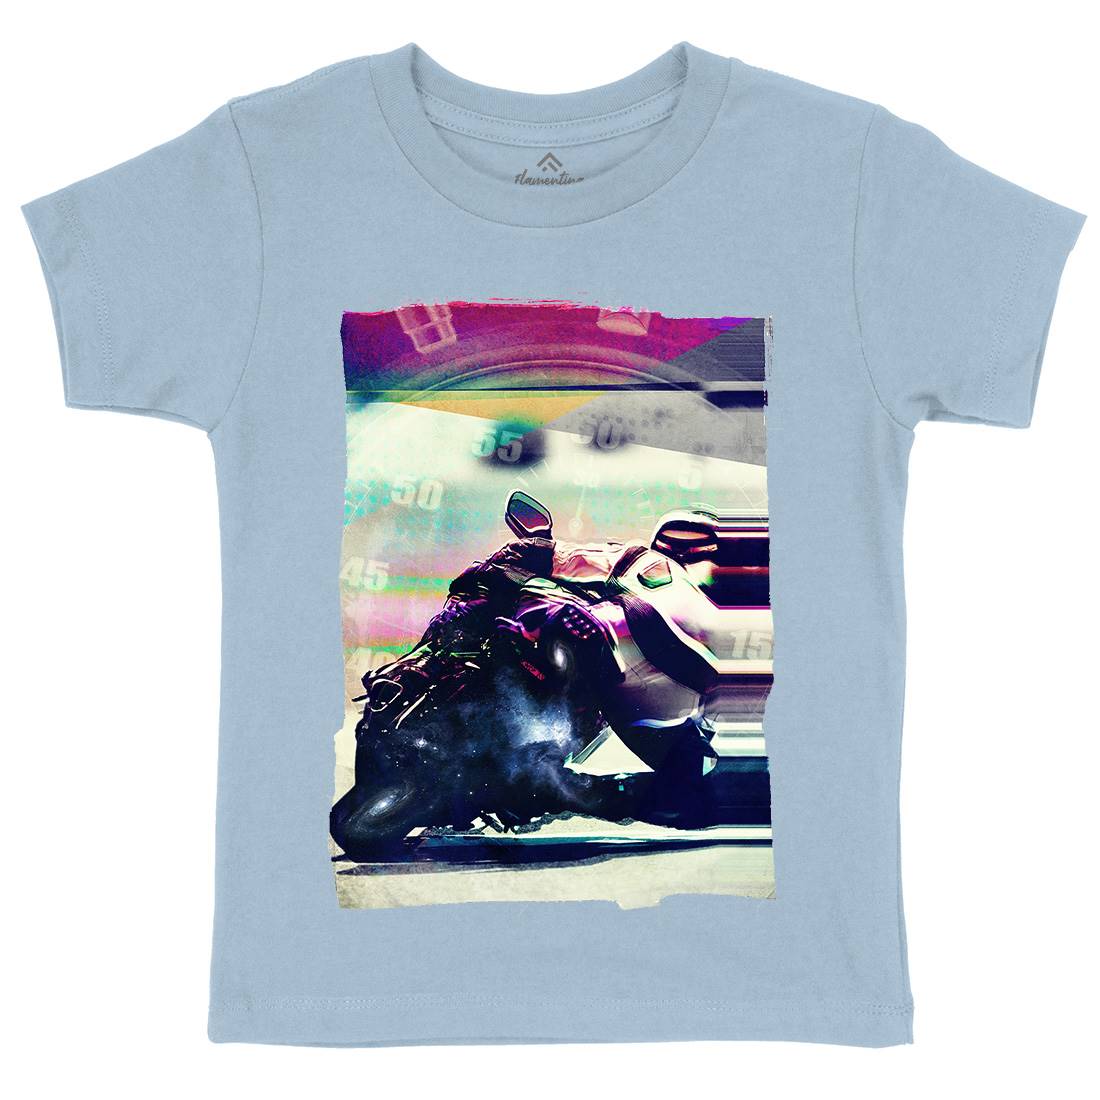 On Time Kids Crew Neck T-Shirt Motorcycles A891